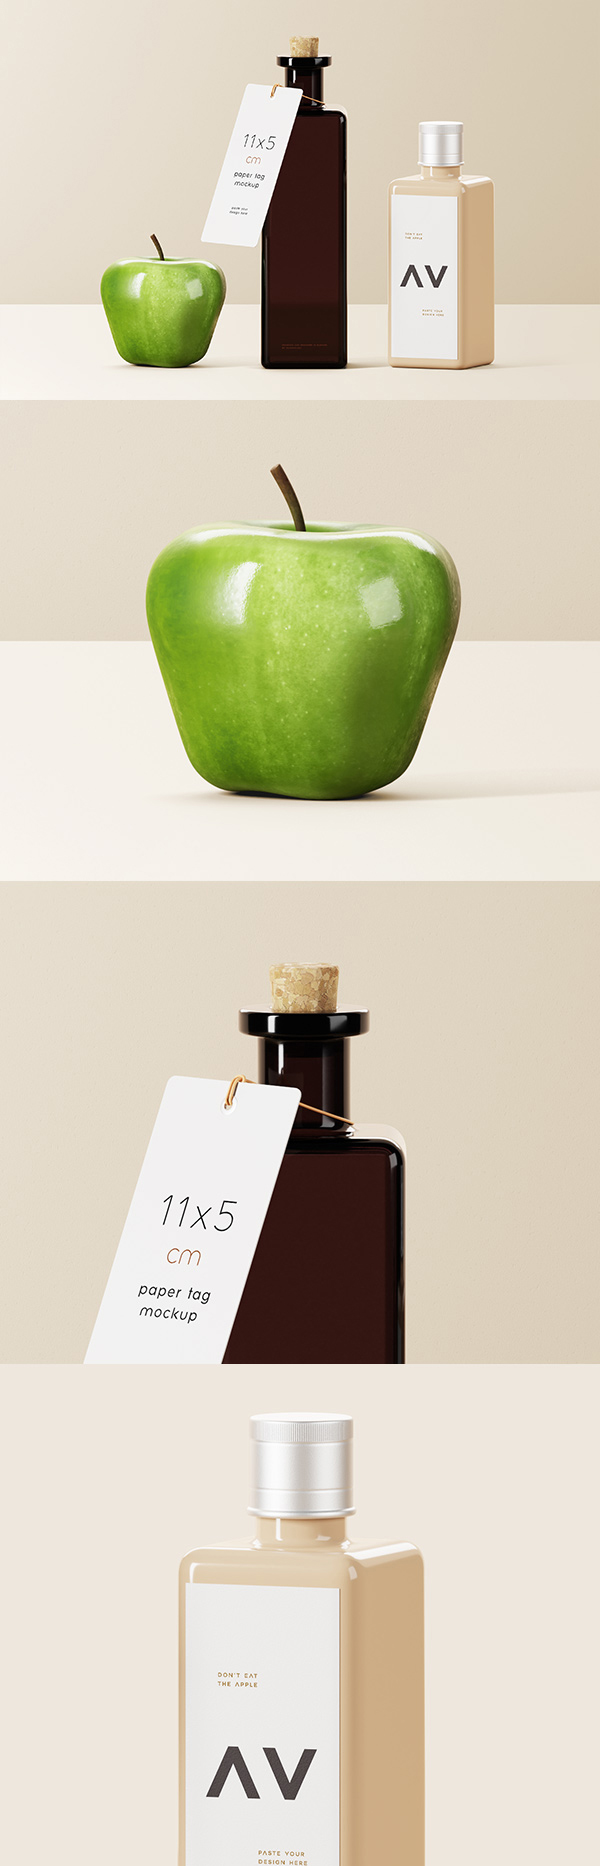 Square Bottles with Apple Mockup